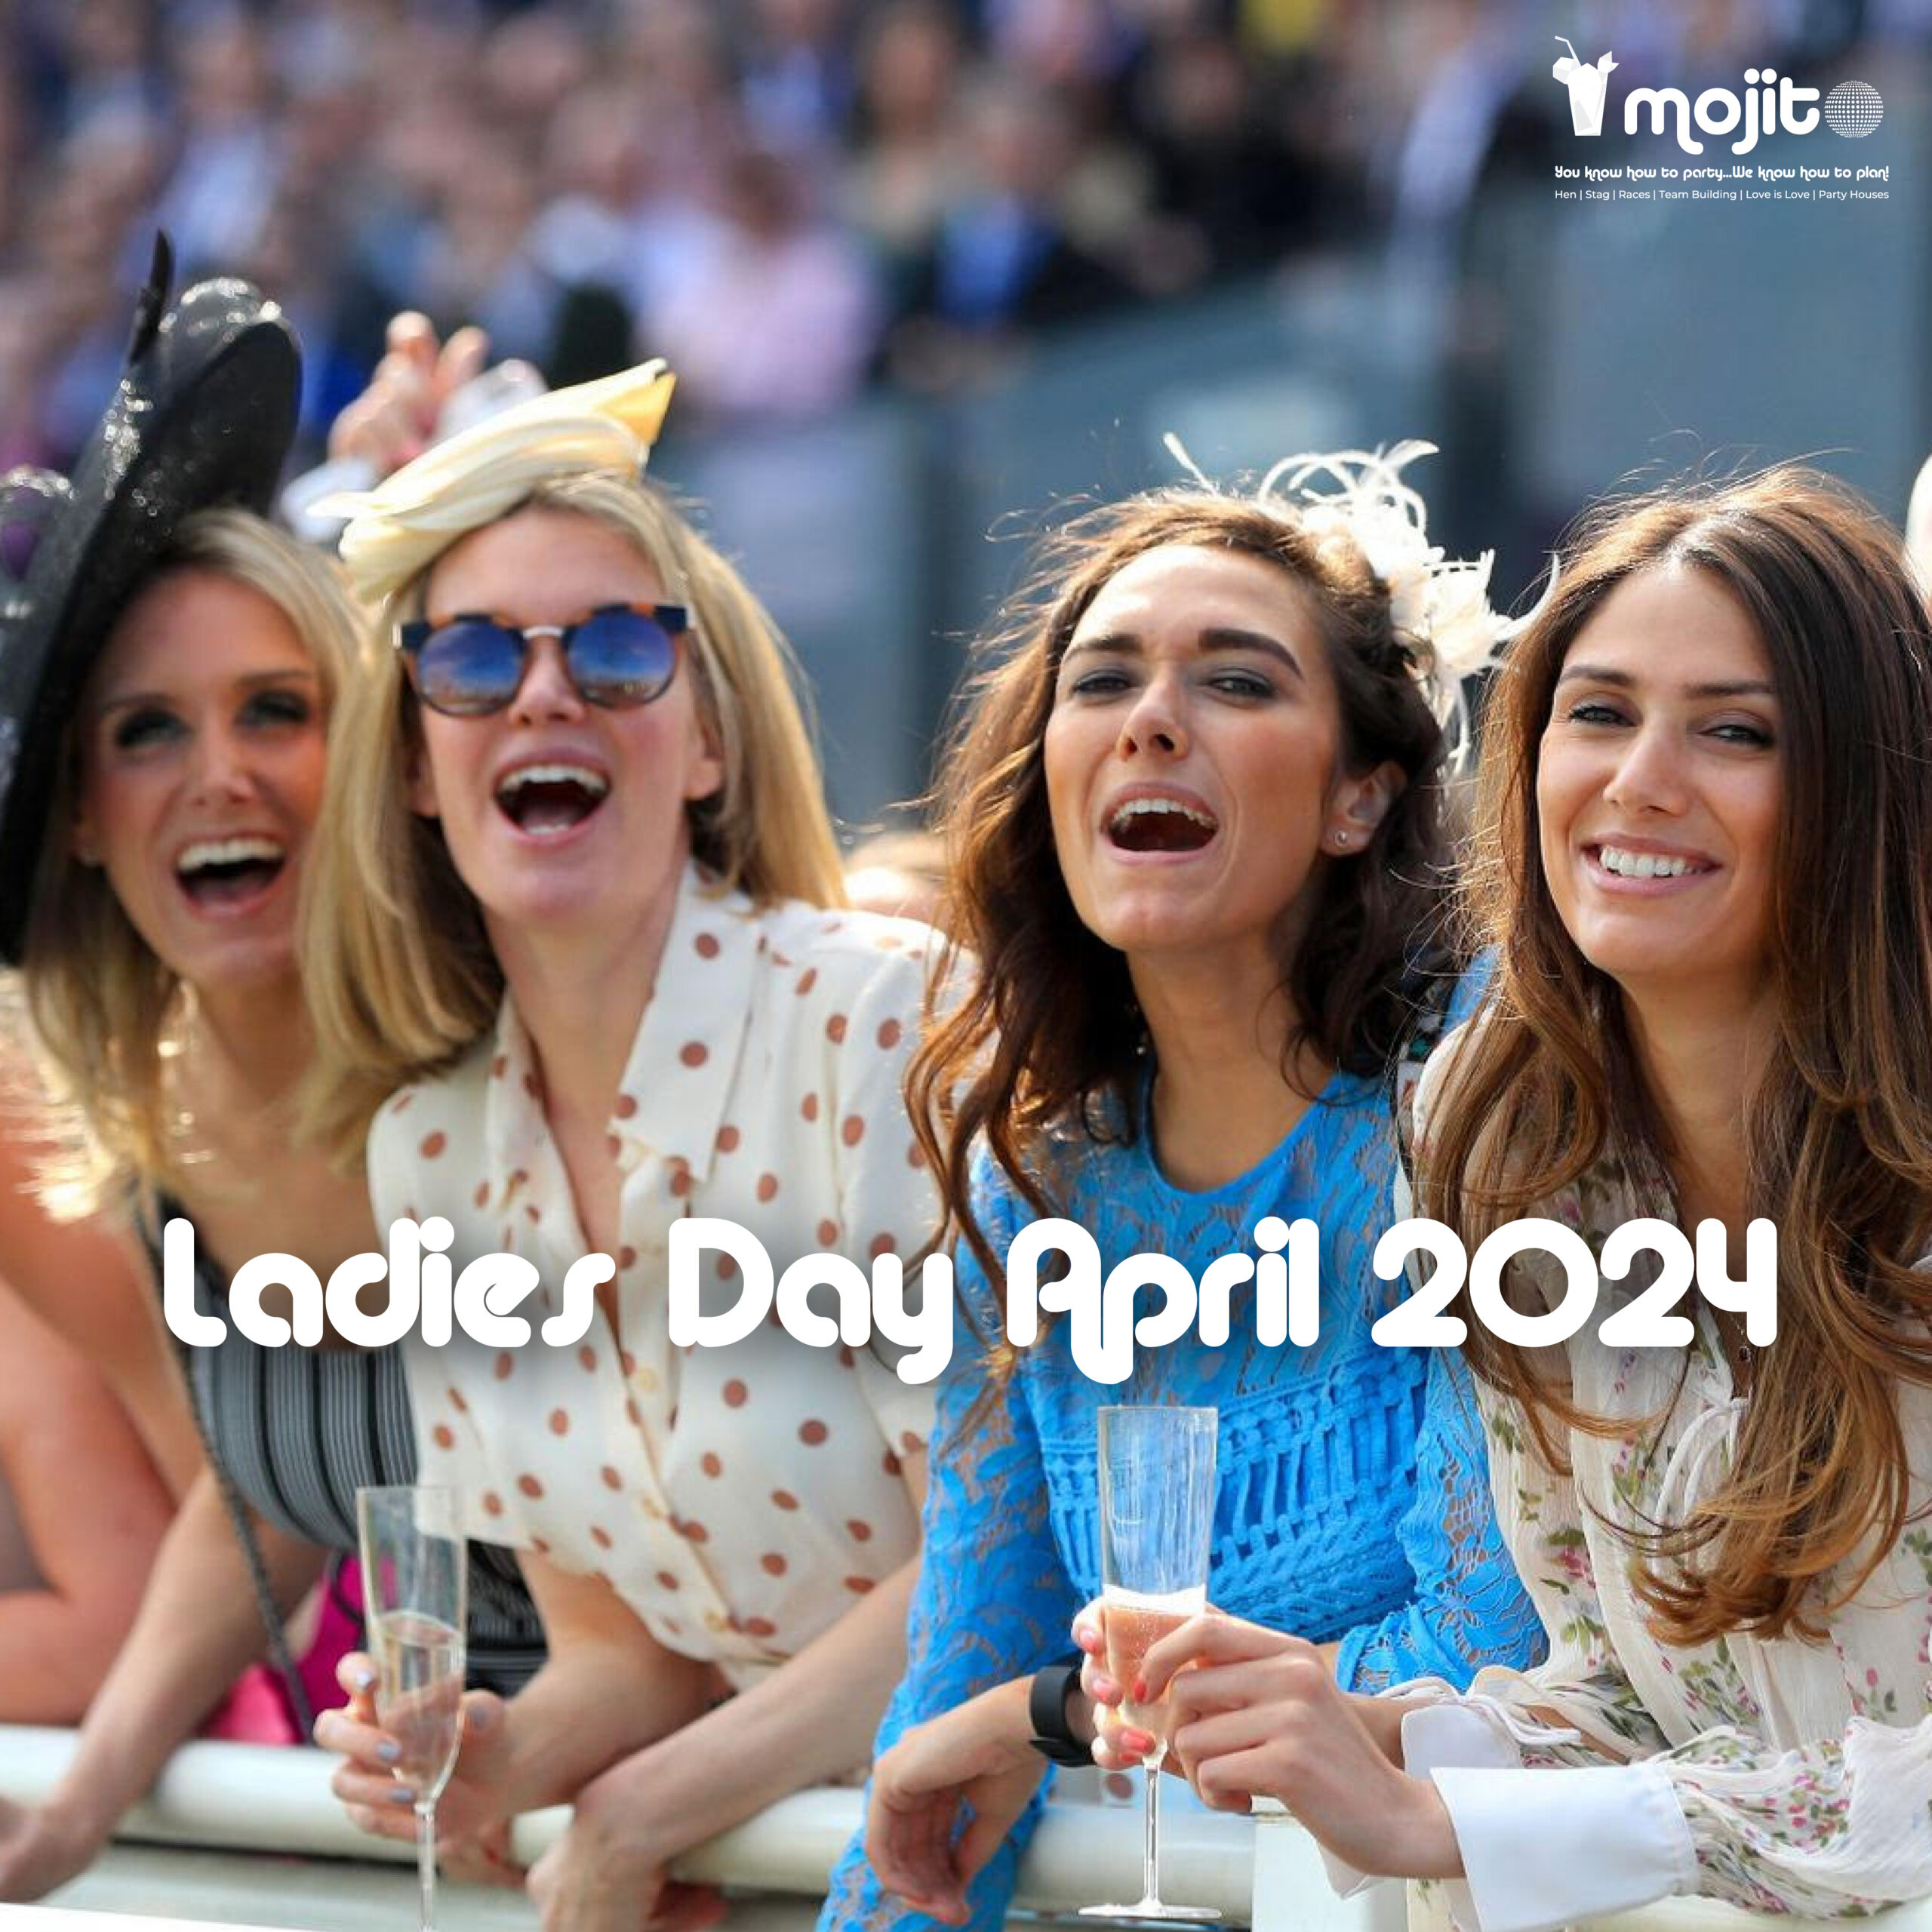 AINTREE LADIES DAY 2024 A Fabulous Two Night VIP Races Package From £